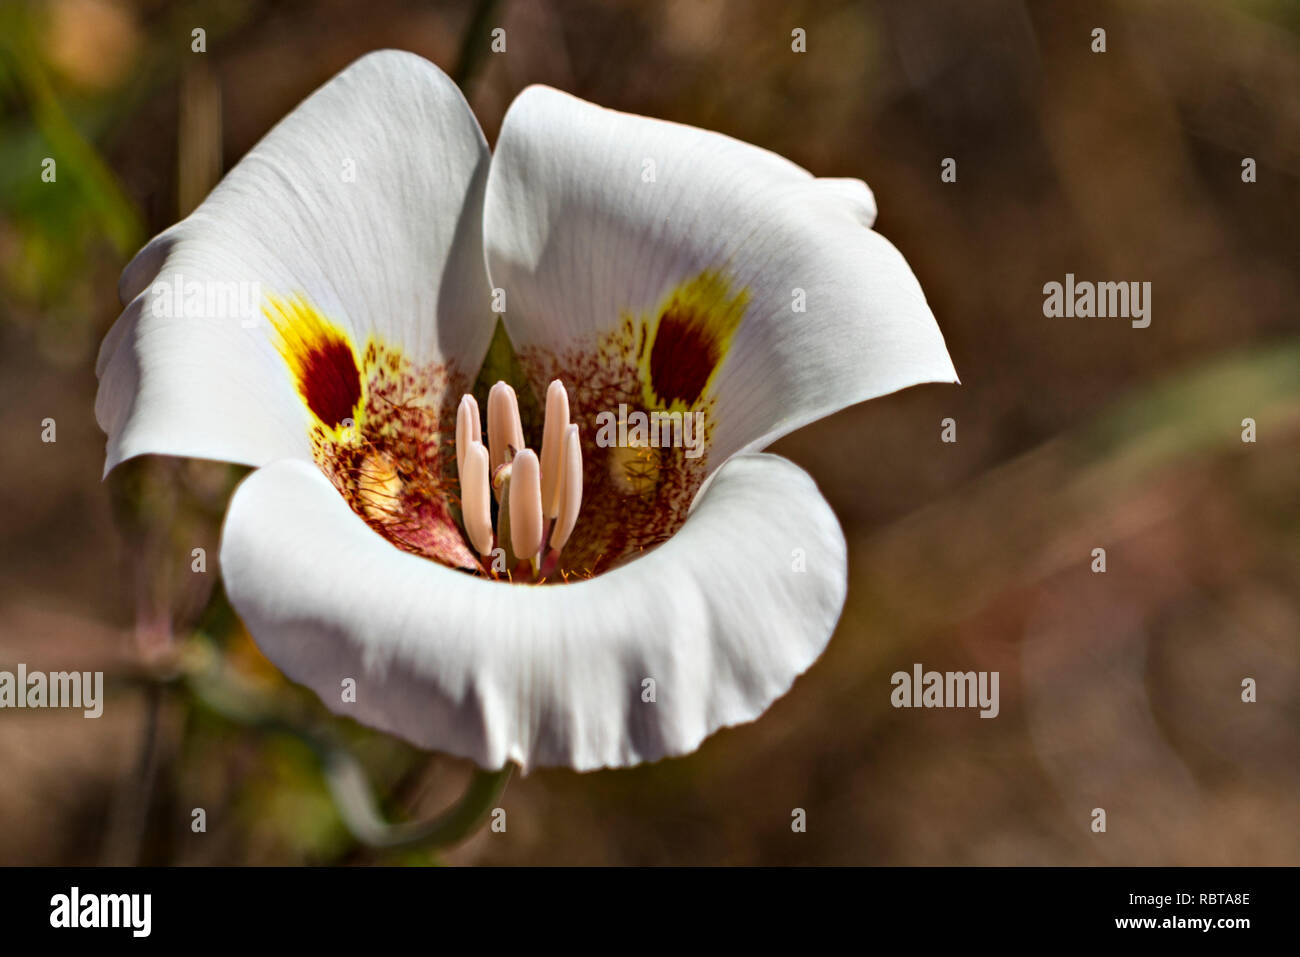 Butterfly Mariposa Lily blossom flower Stock Photo